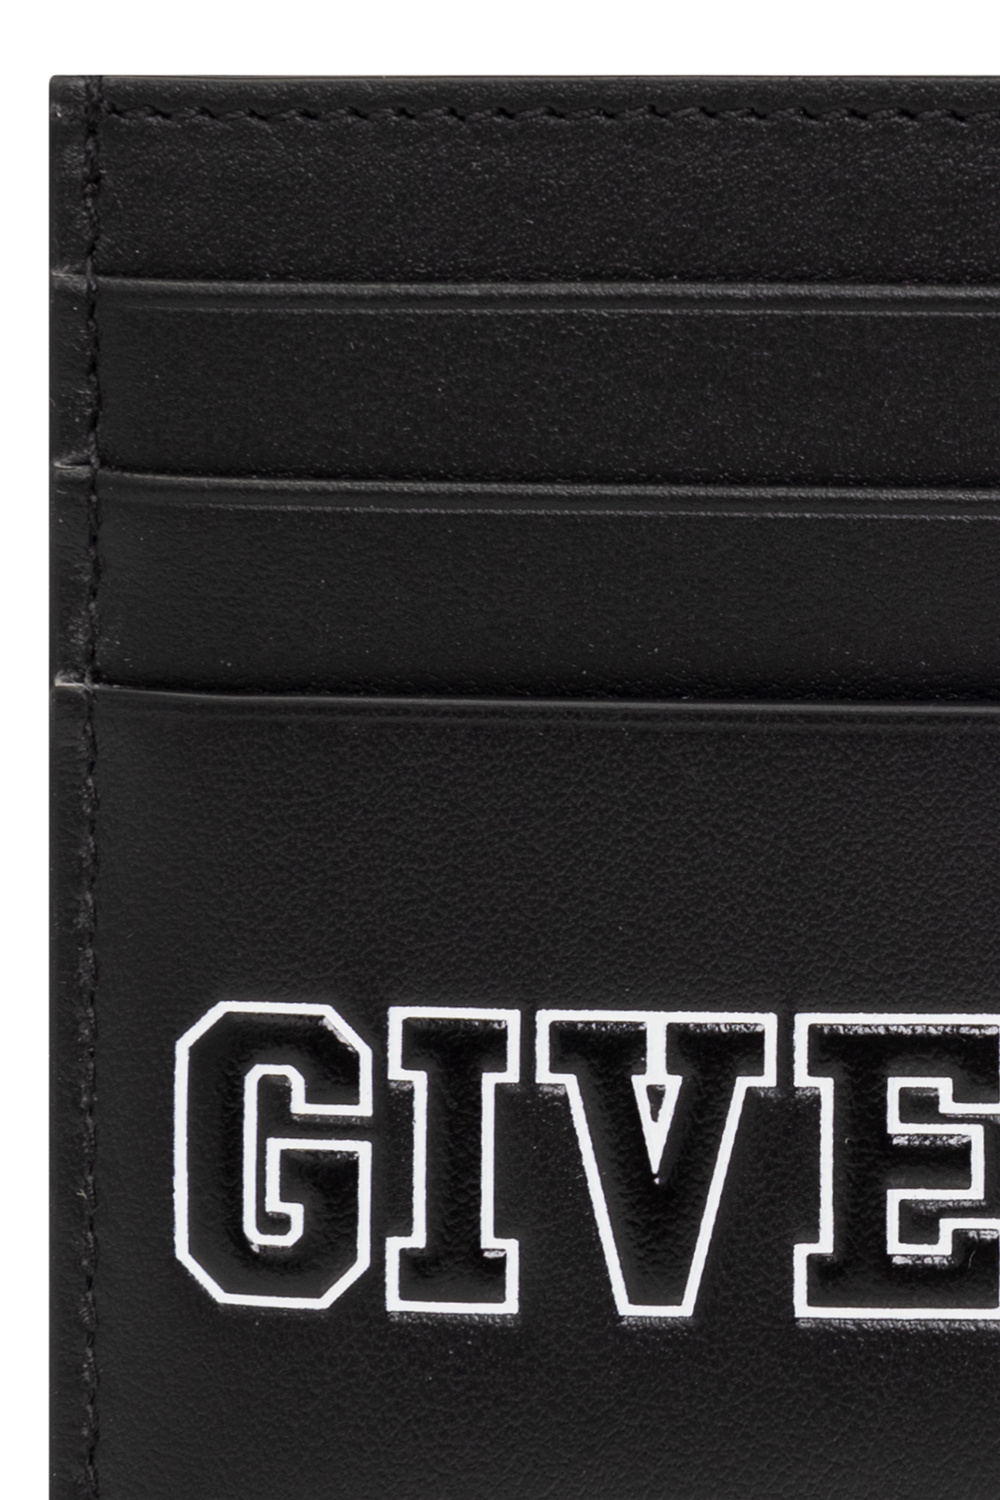 Givenchy Givenchy Embossed 4G Logo Bicolour Card Holder